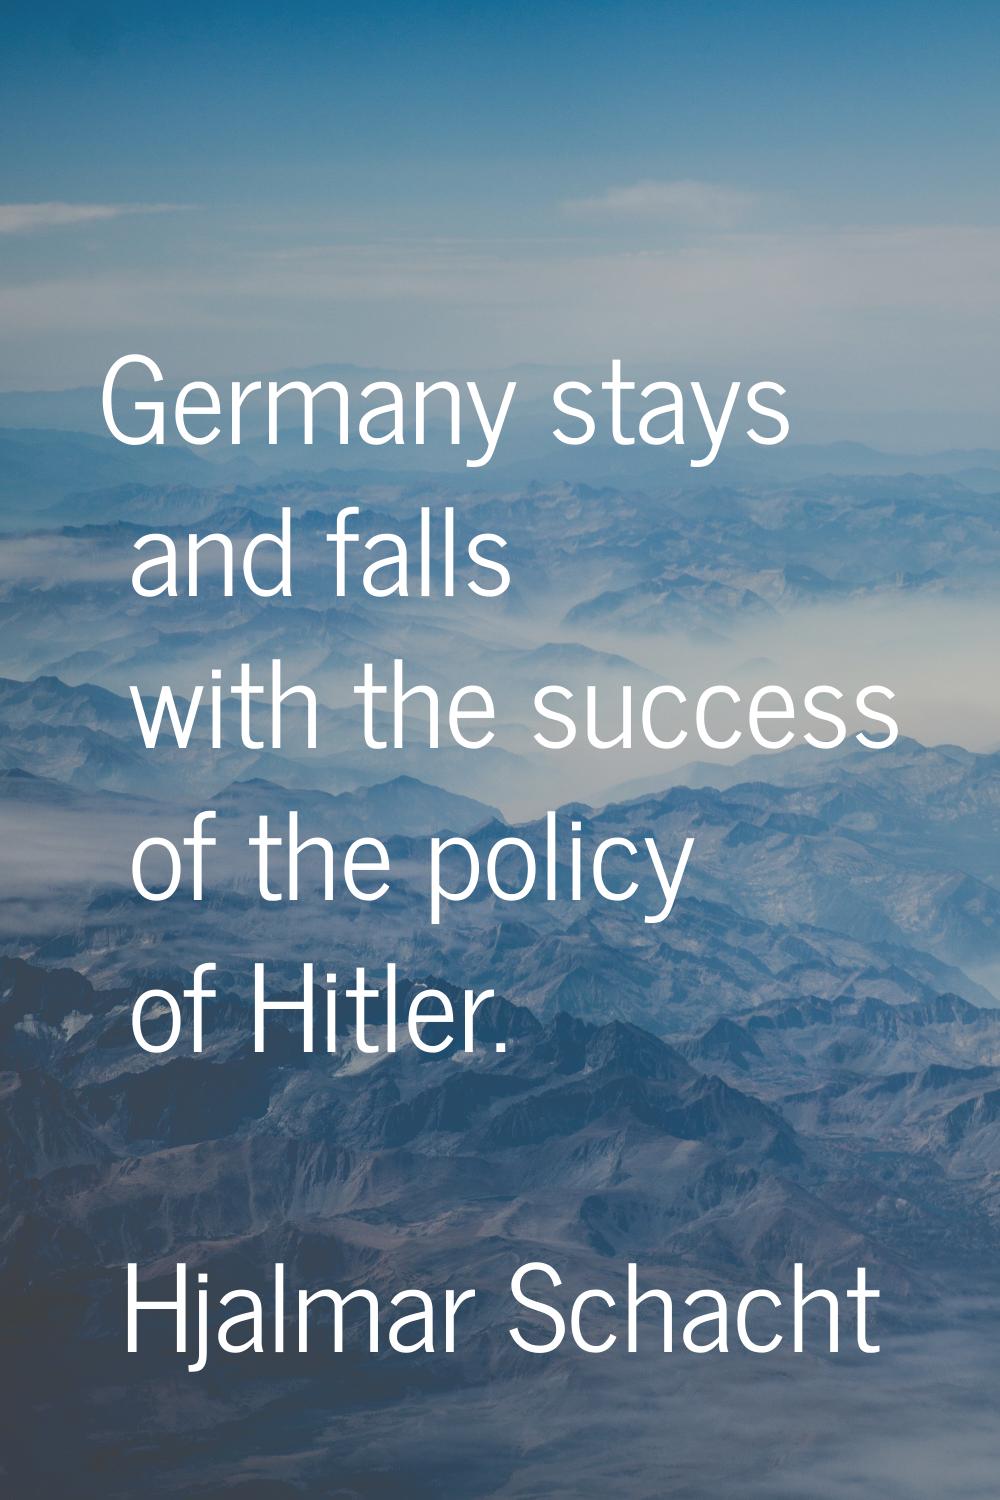 Germany stays and falls with the success of the policy of Hitler.